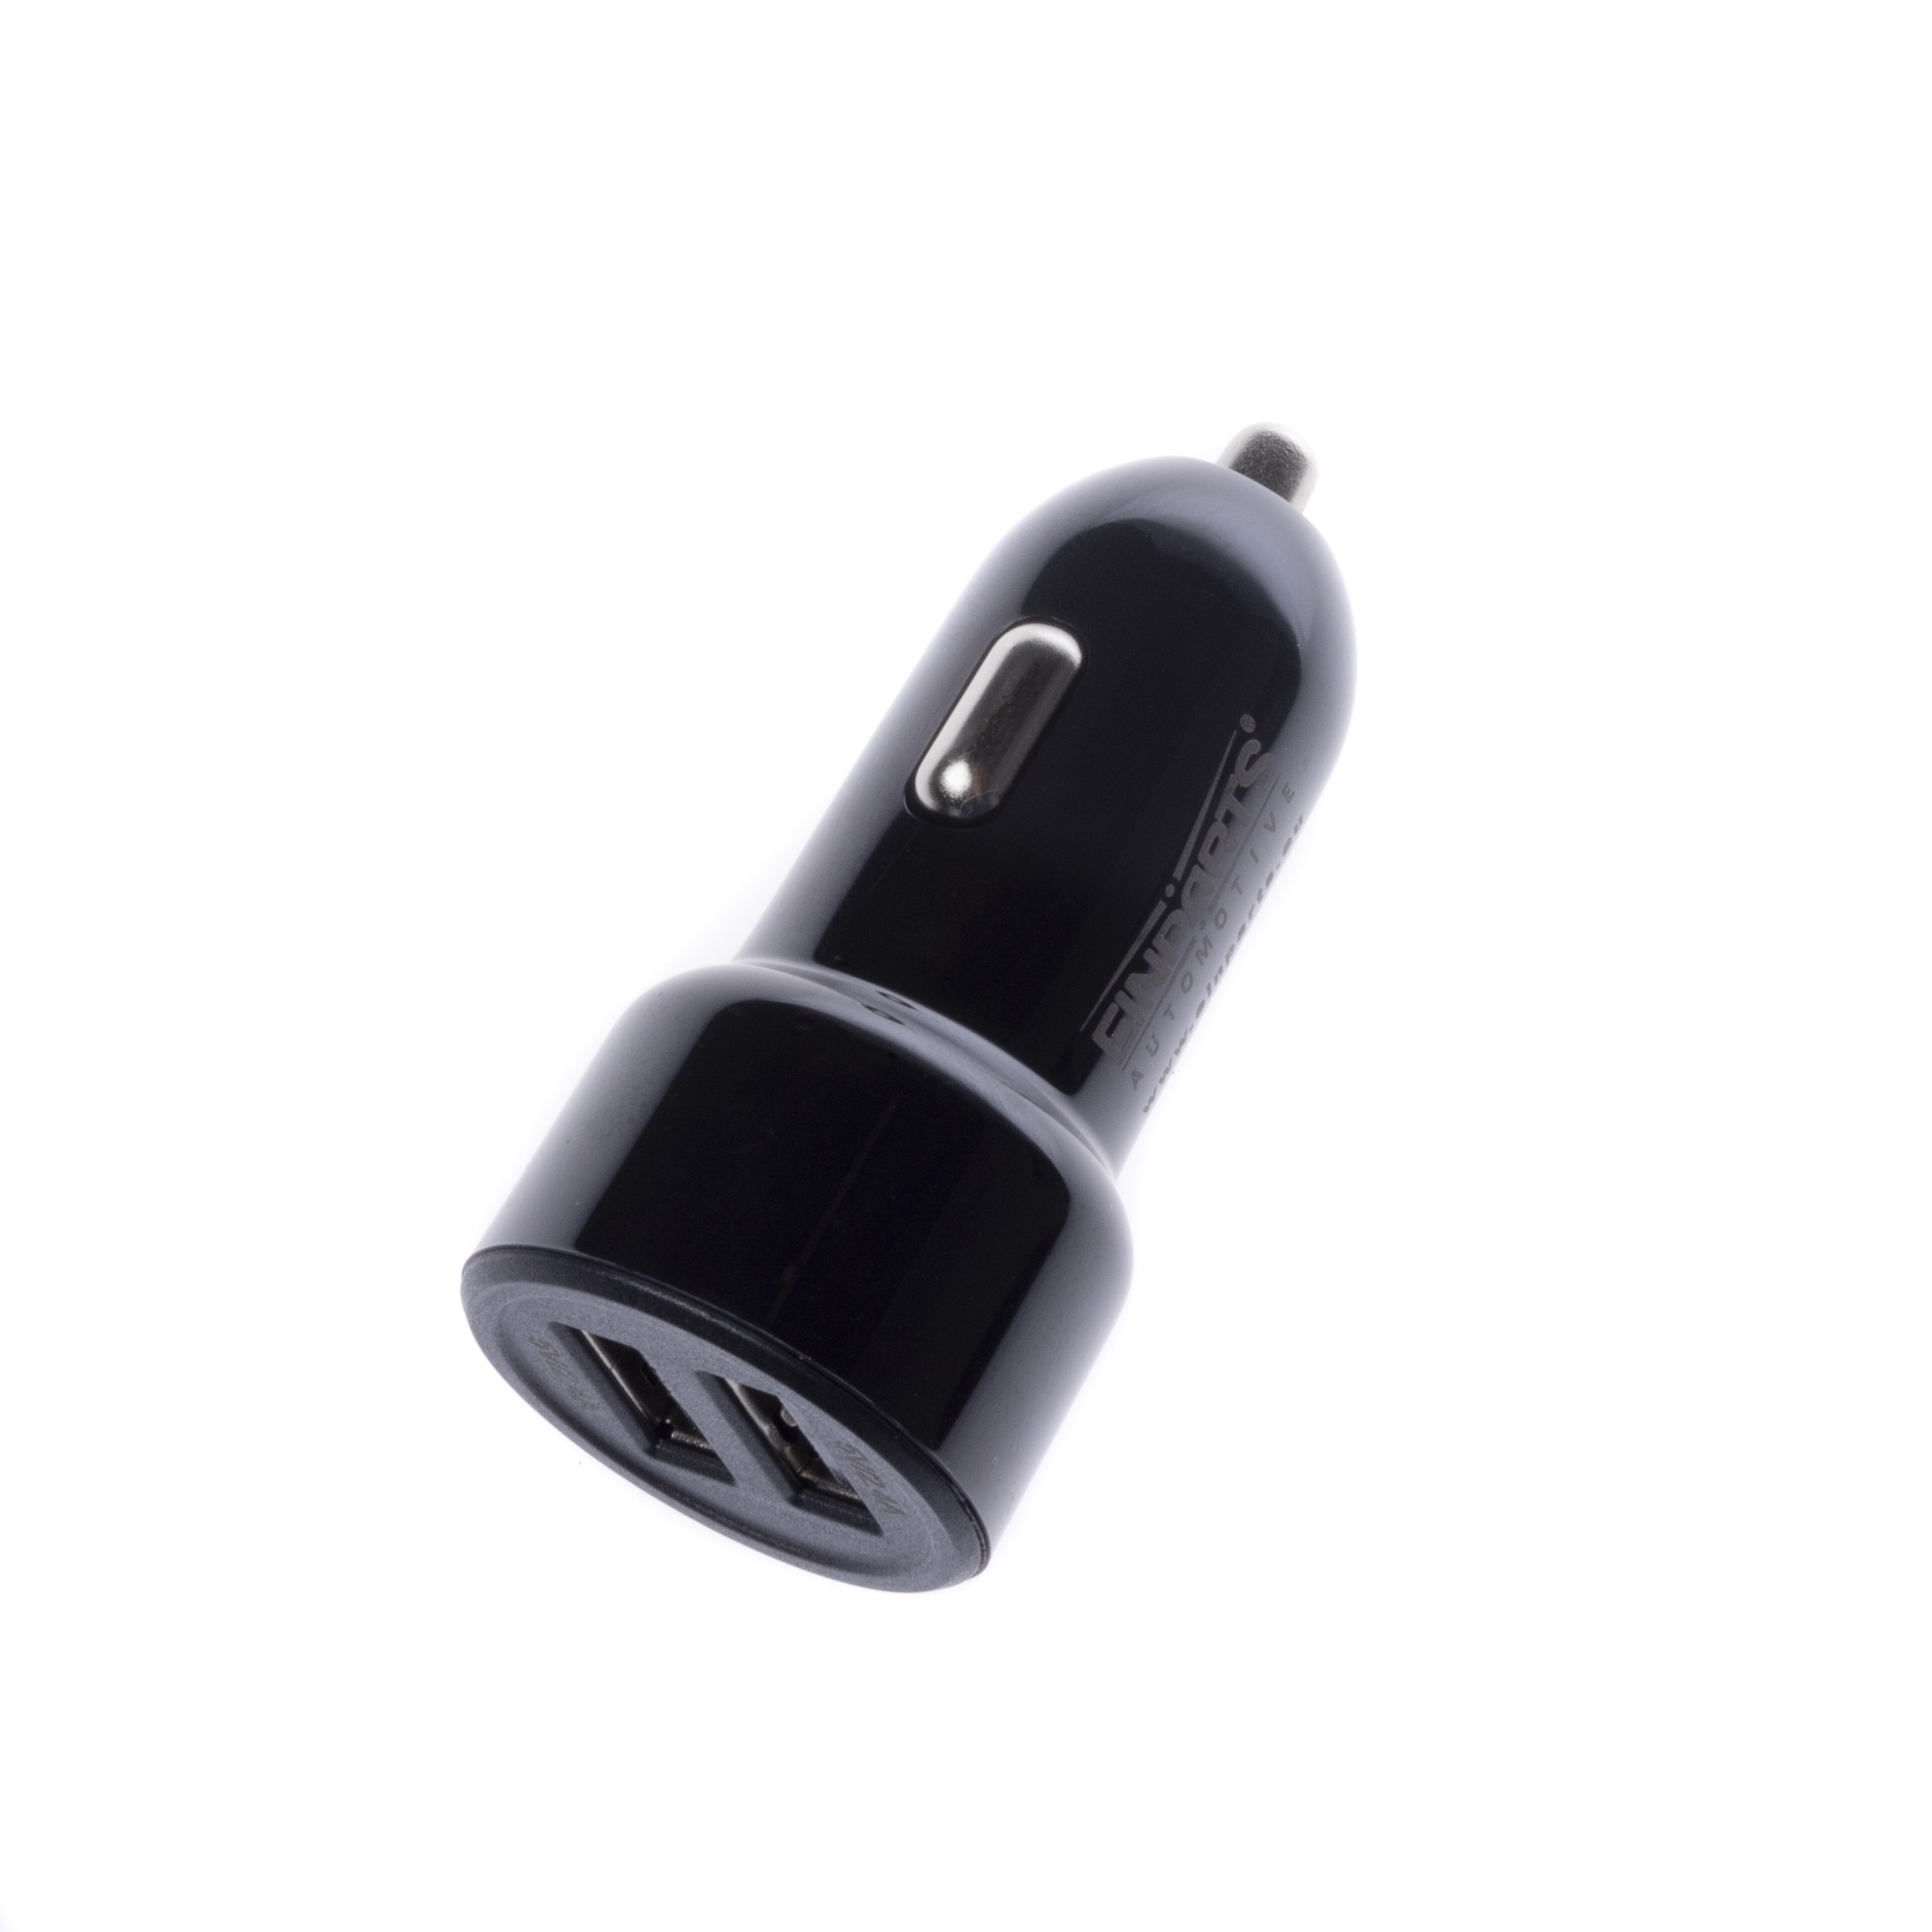 EPACC010 QUICK CAR CHARGER 4.8A